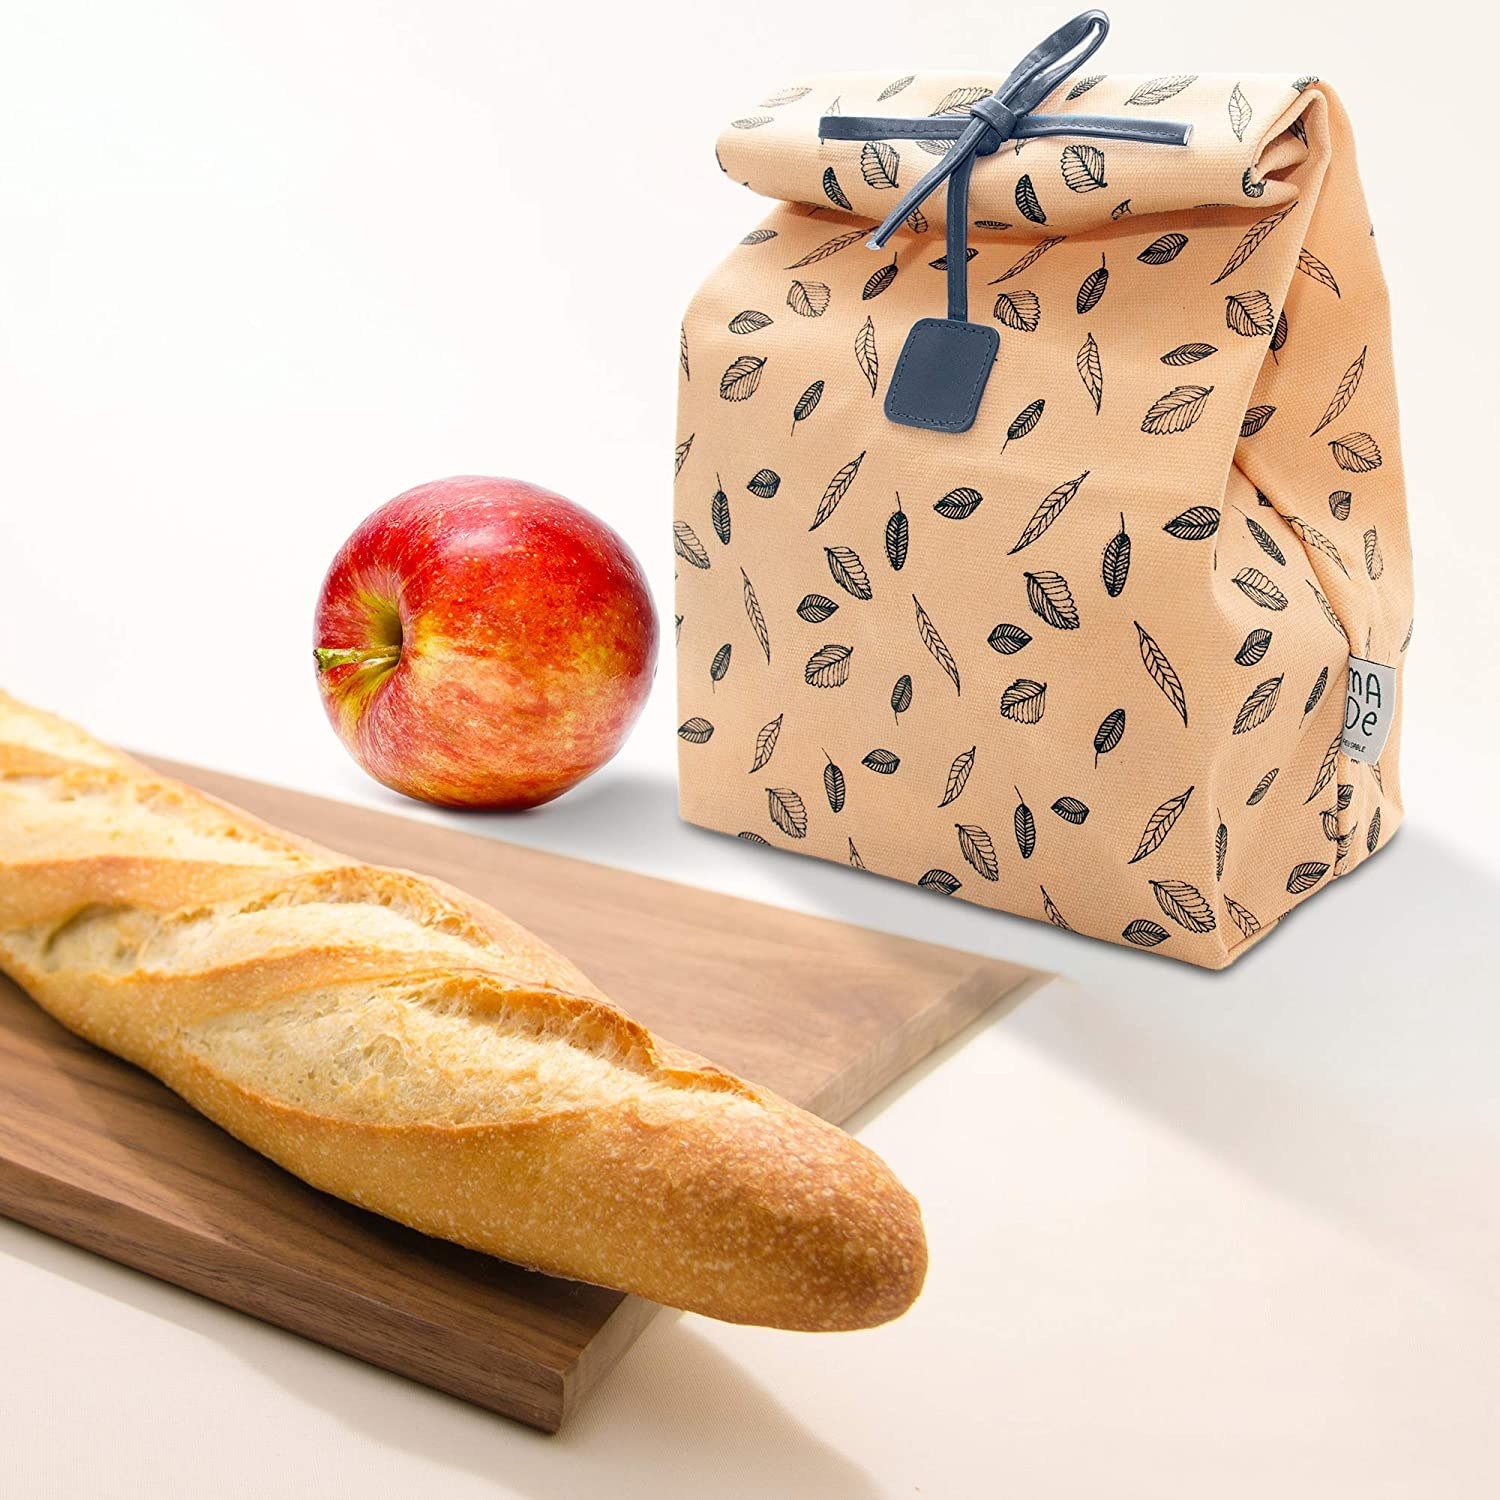 The printed lunch bag on a surface with bread and an apple